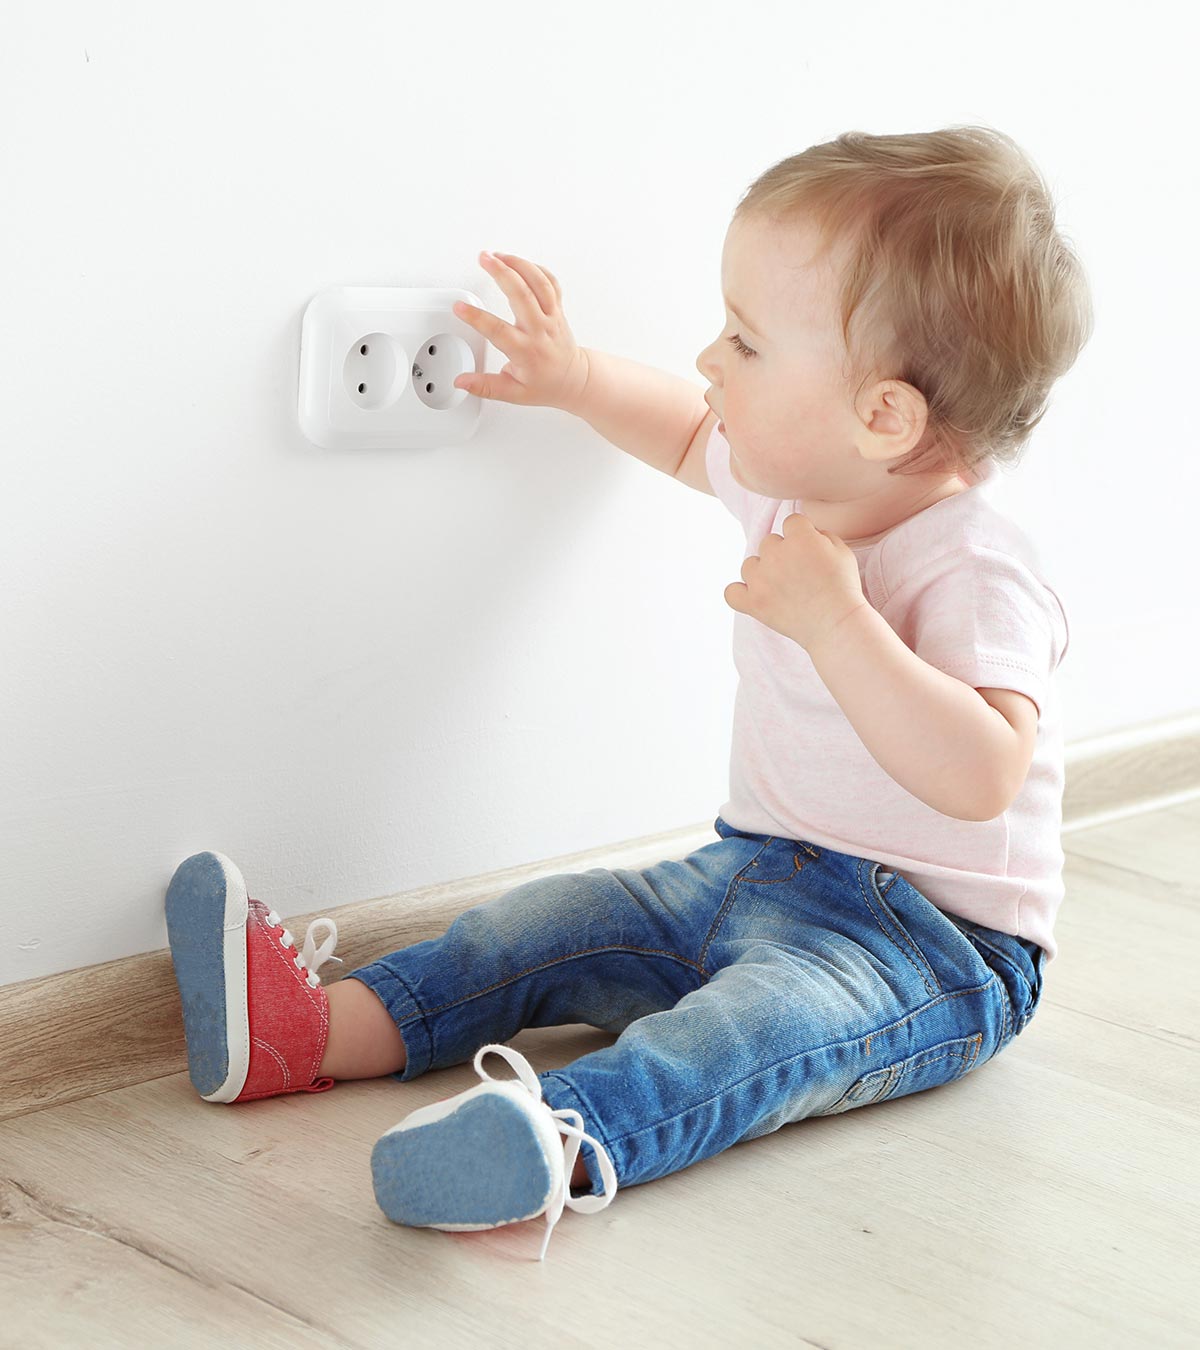 New First Steps Socket Plug Covers 12 Pack Baby/Child Guards Electrical Safety 